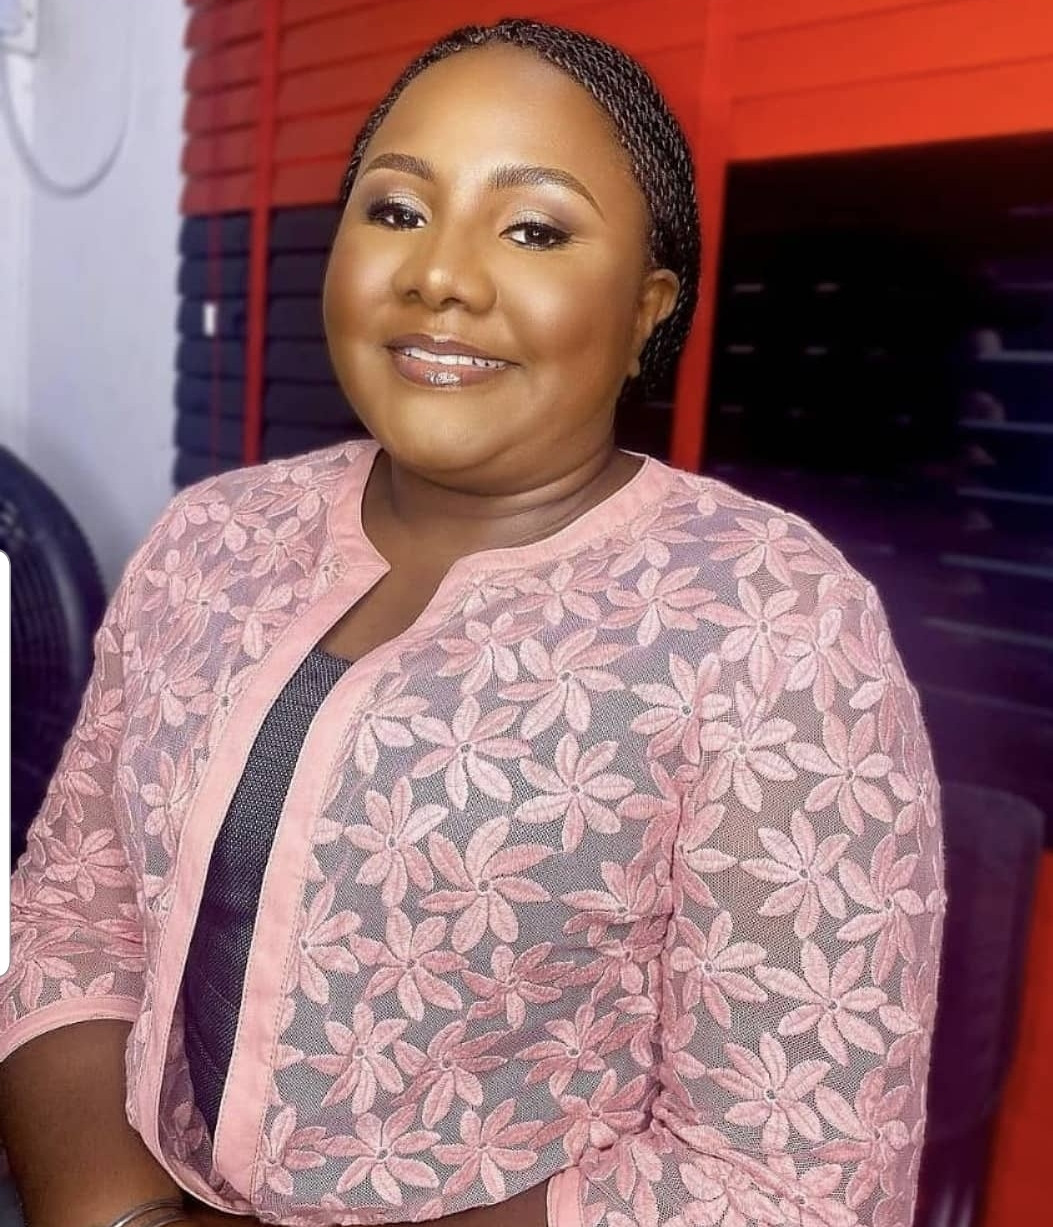 Former Red Media Partner and Future Awards Co-founder, Emilia Asim is dead